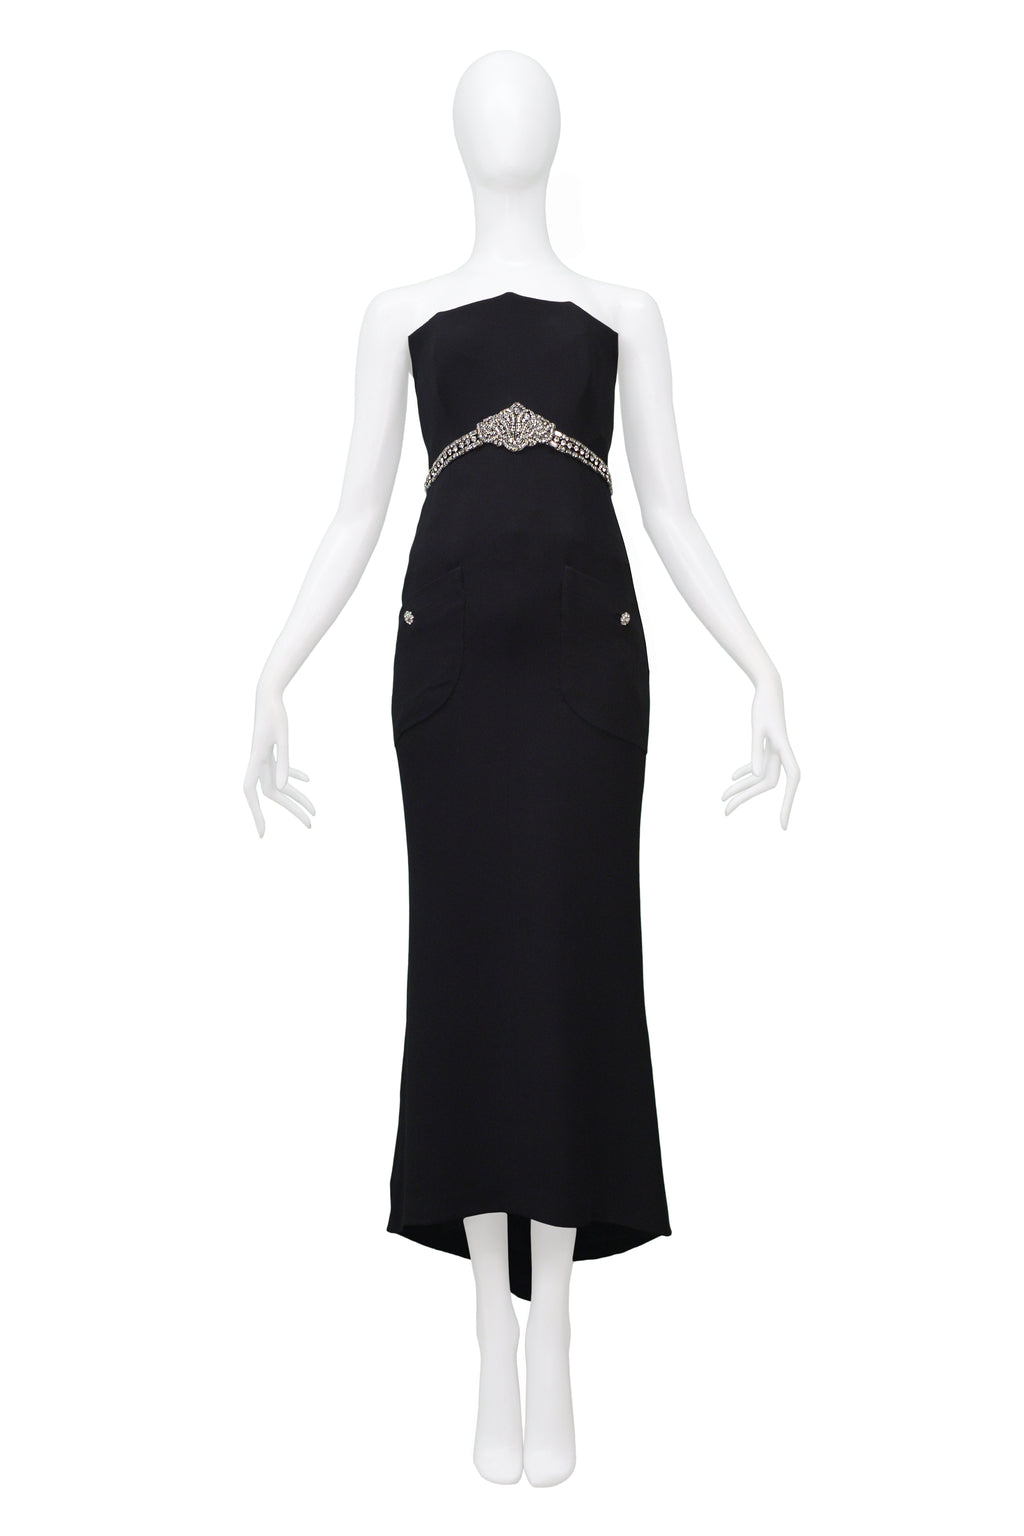 CHANEL BLACK CORSET EVENING GOWN WITH RHINESTONES